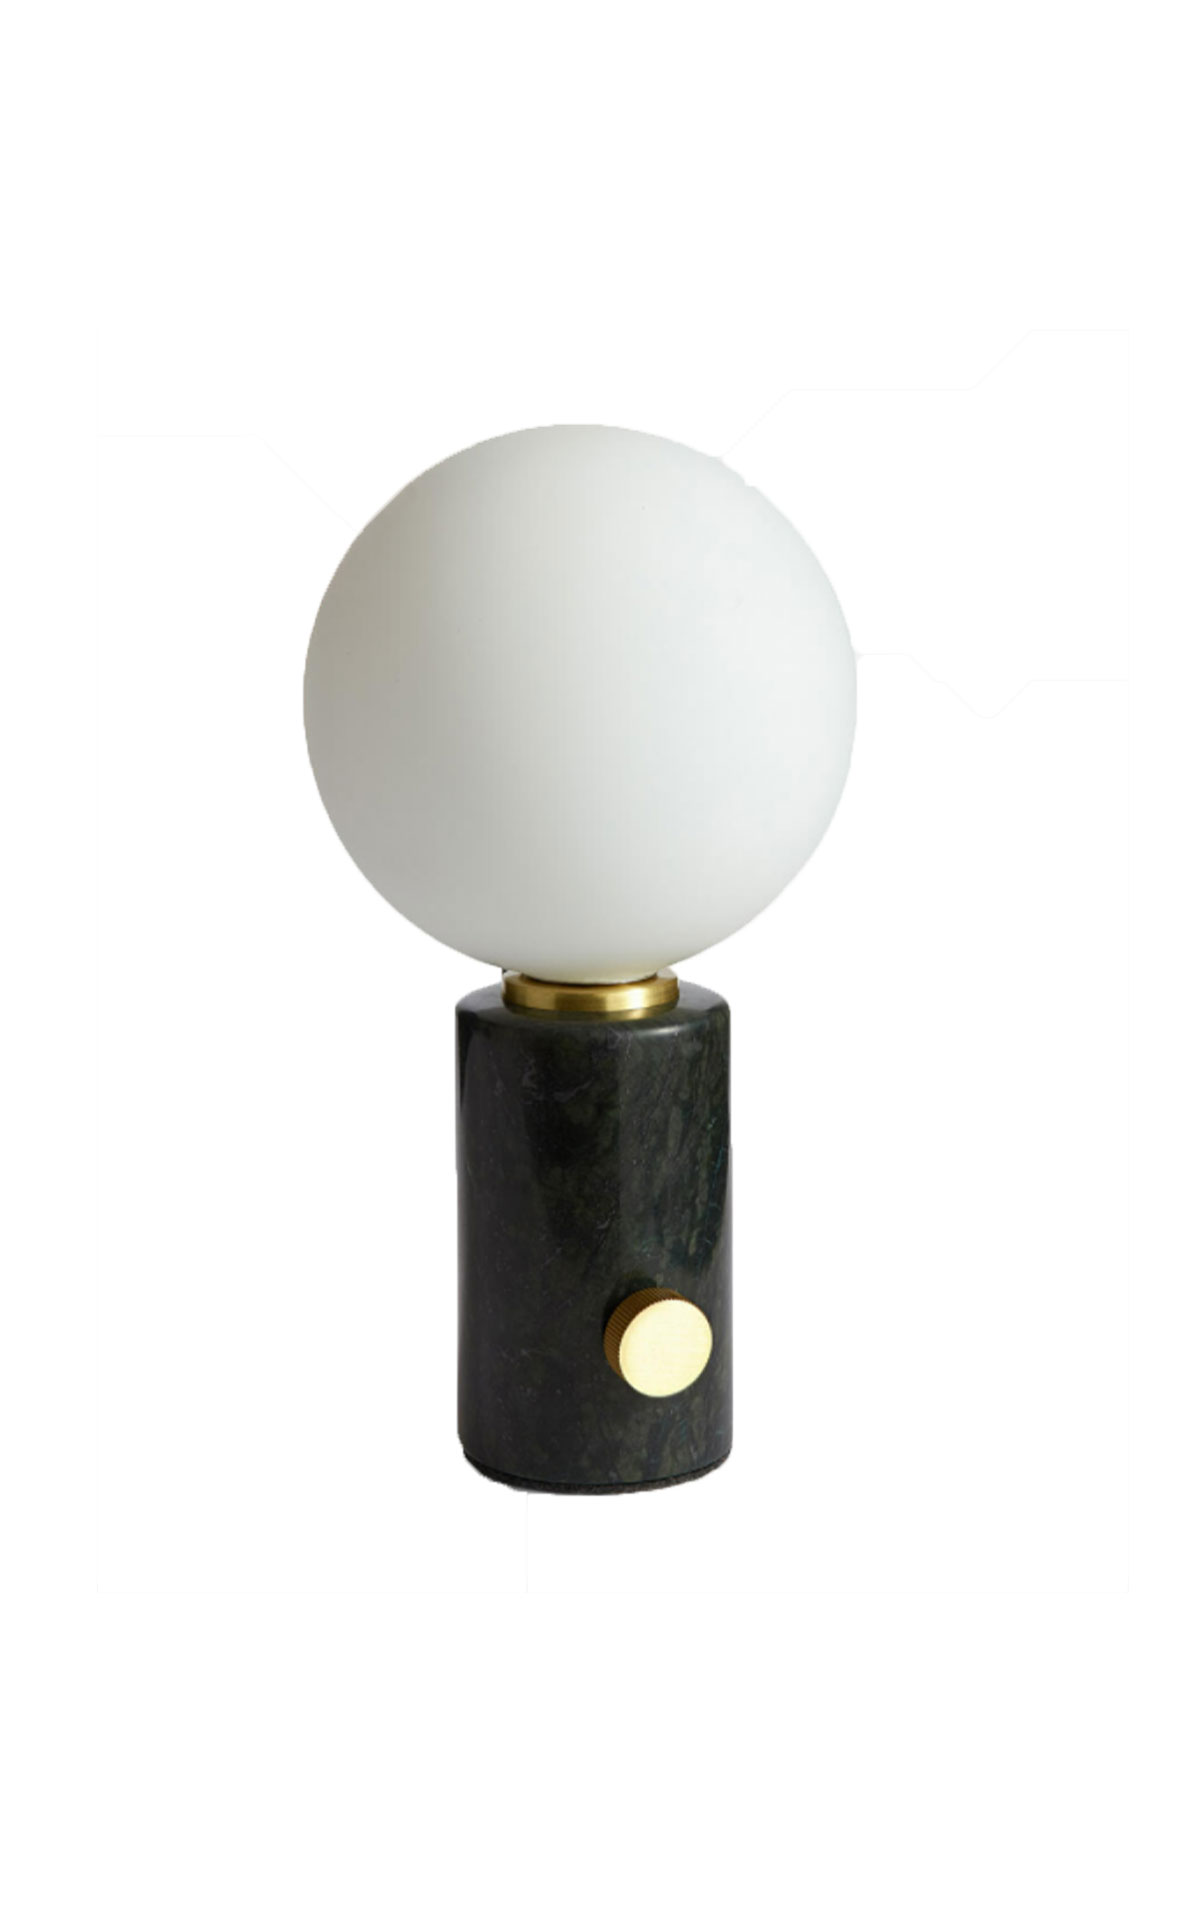 Soho Home Silas table lamp from Bicester Village